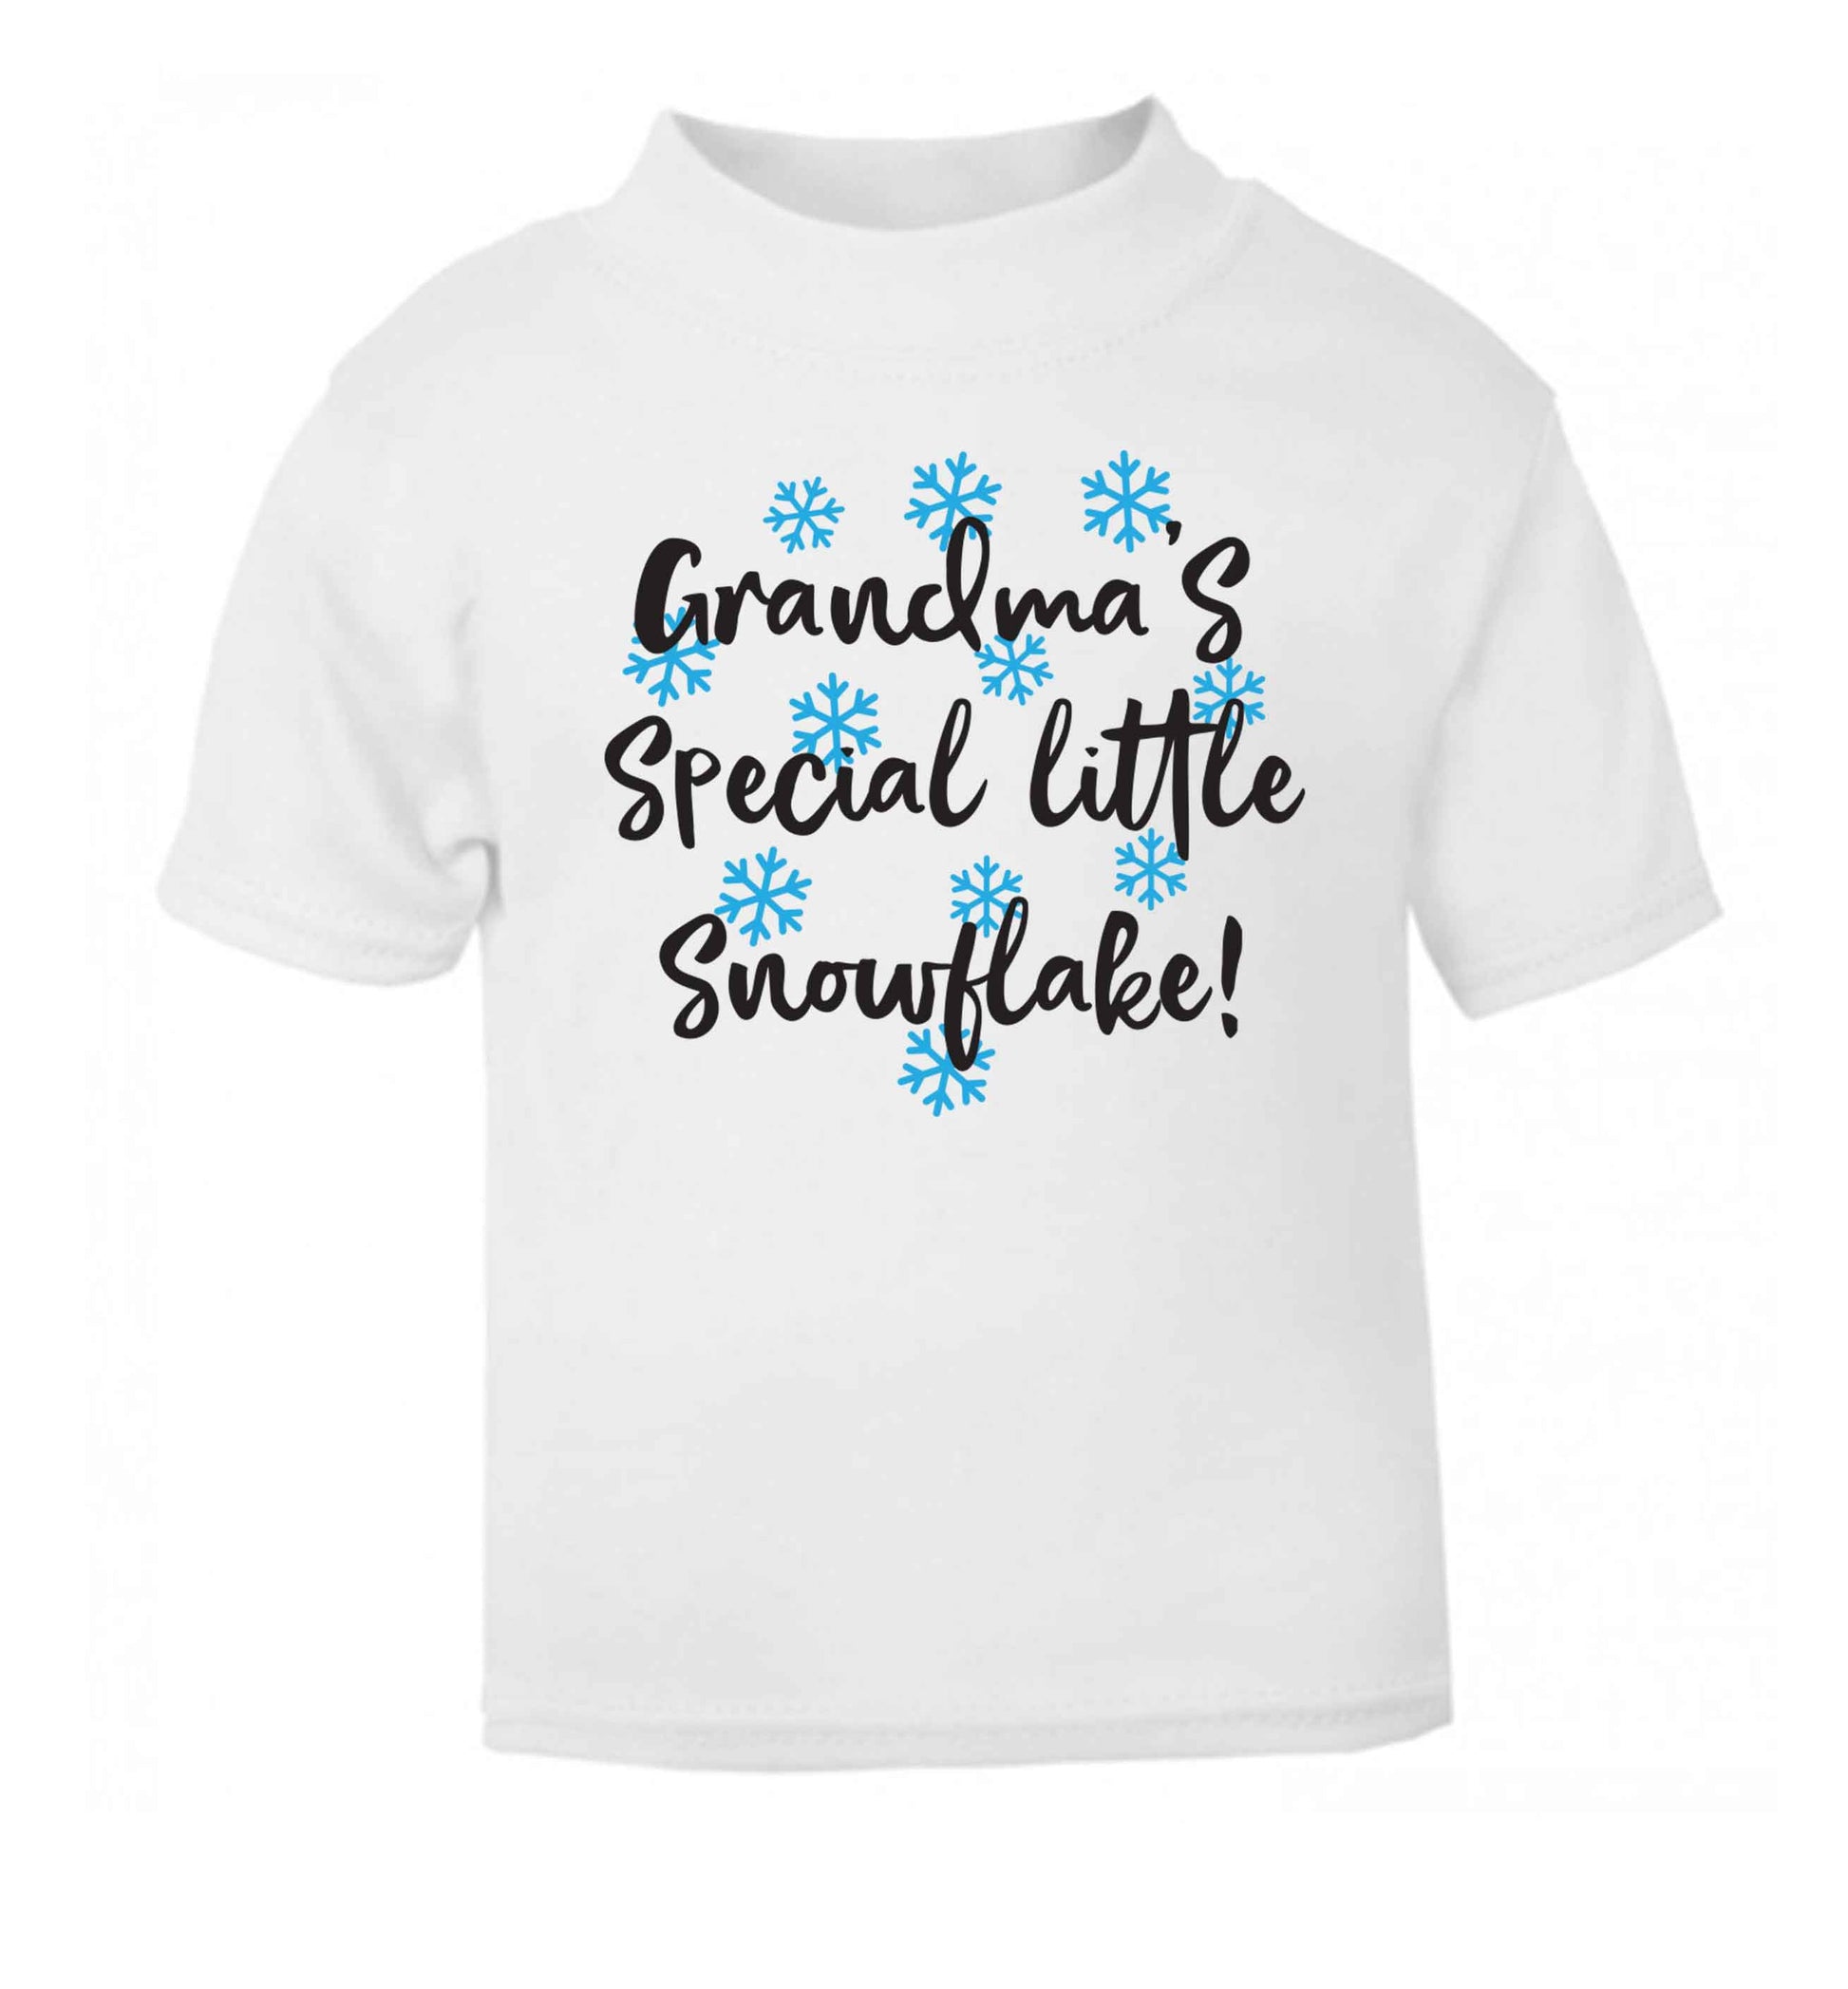 Grandma's special little snowflake white Baby Toddler Tshirt 2 Years